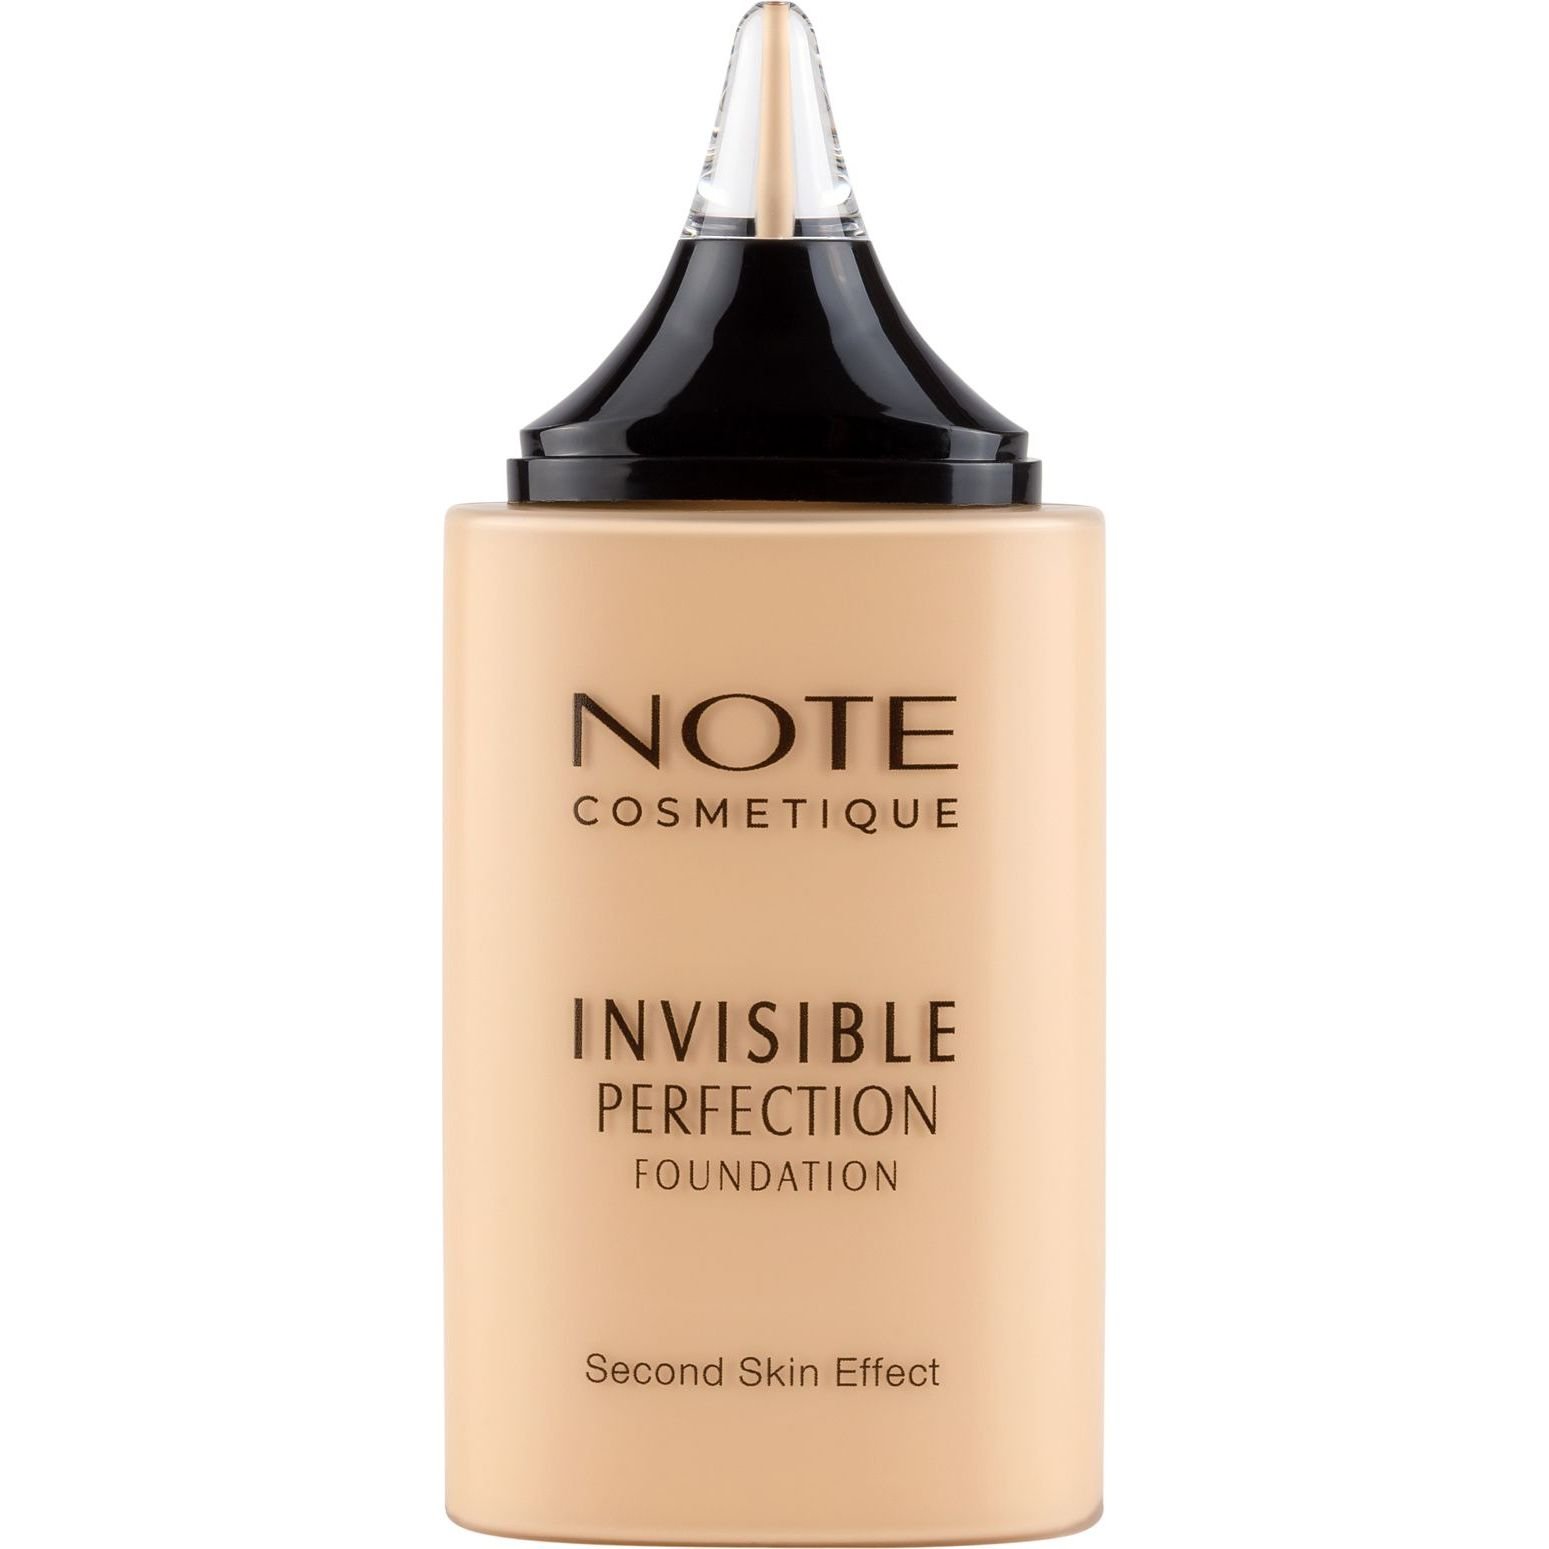 Тональная основа Note Cosmetique Invisible Perfection Foundation тон 130 (Nude Bisque) 35 мл - фото 2